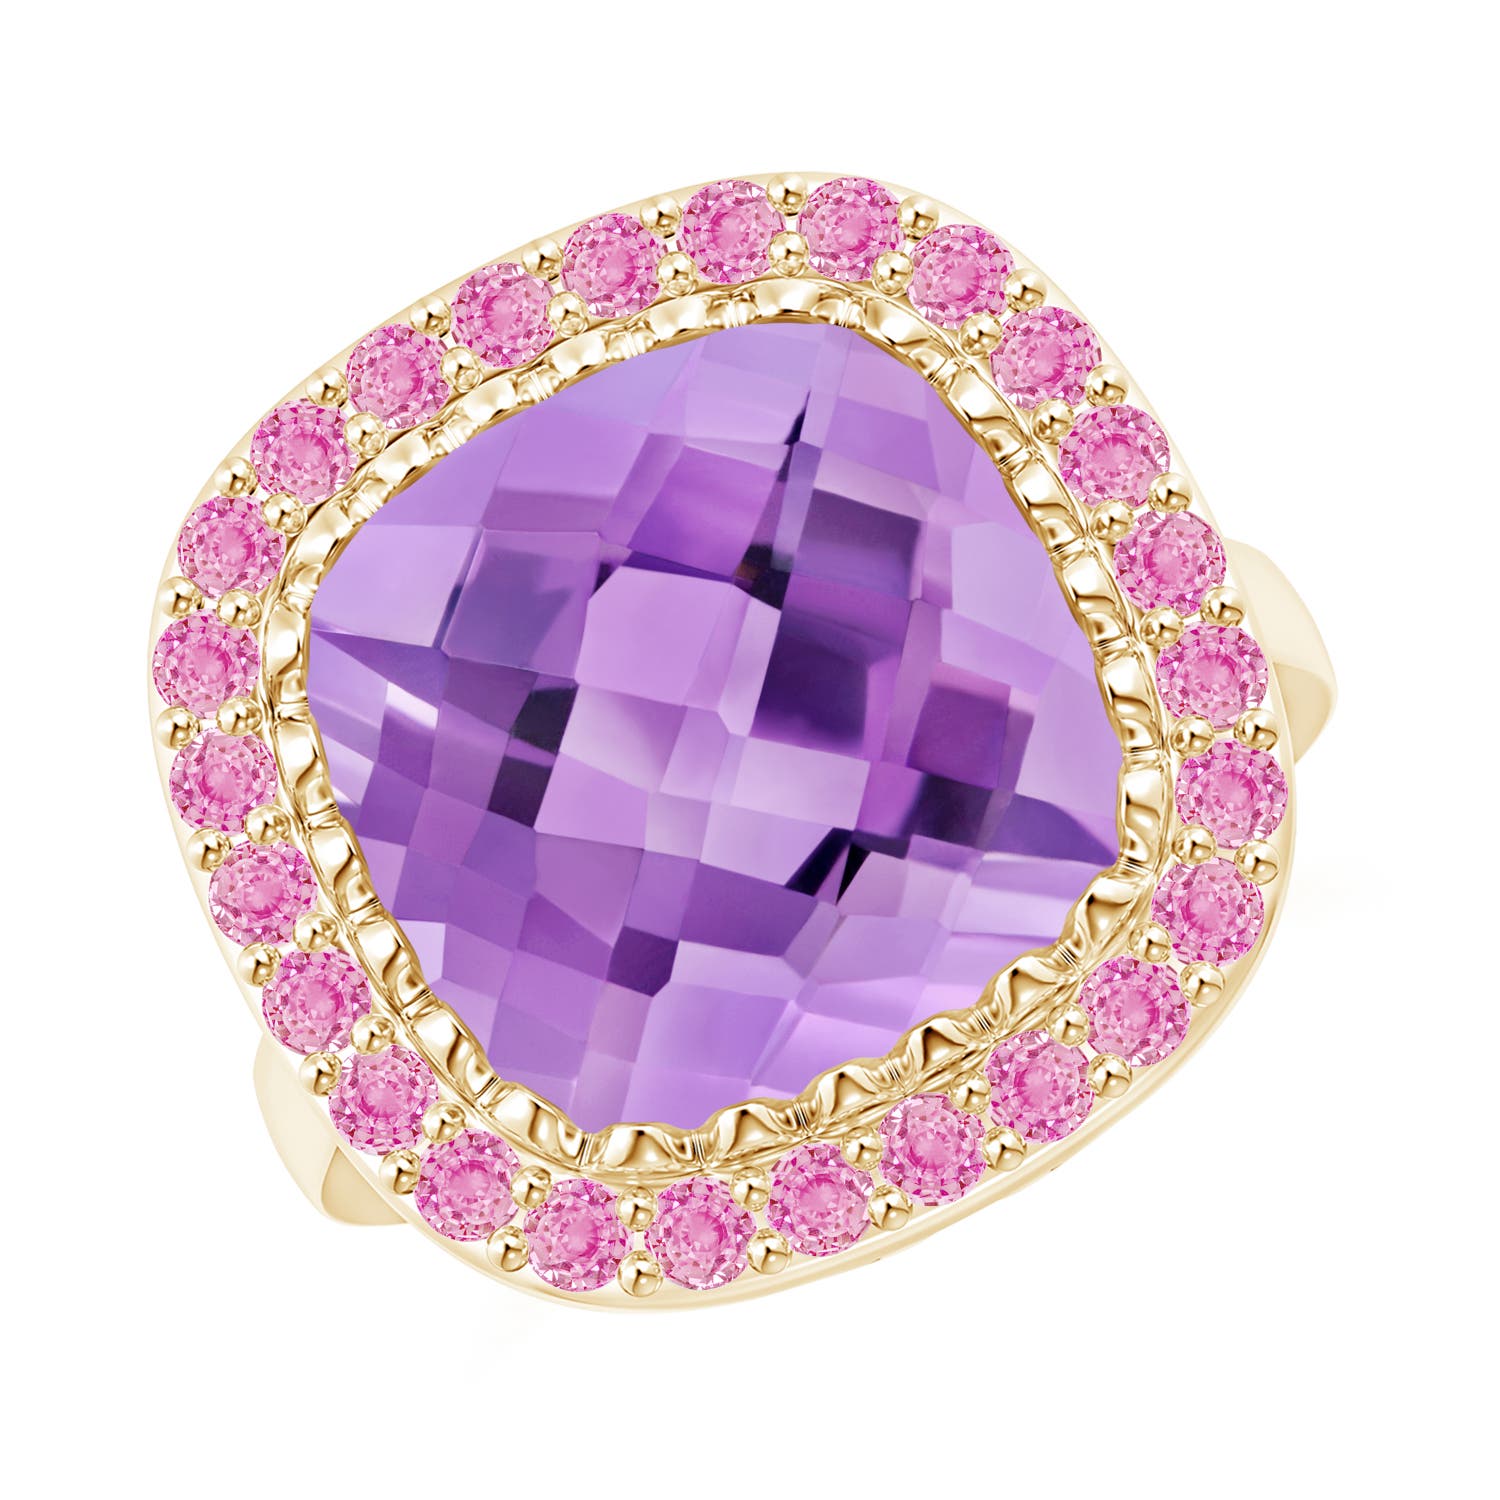 A - Amethyst / 6.98 CT / 14 KT Yellow Gold